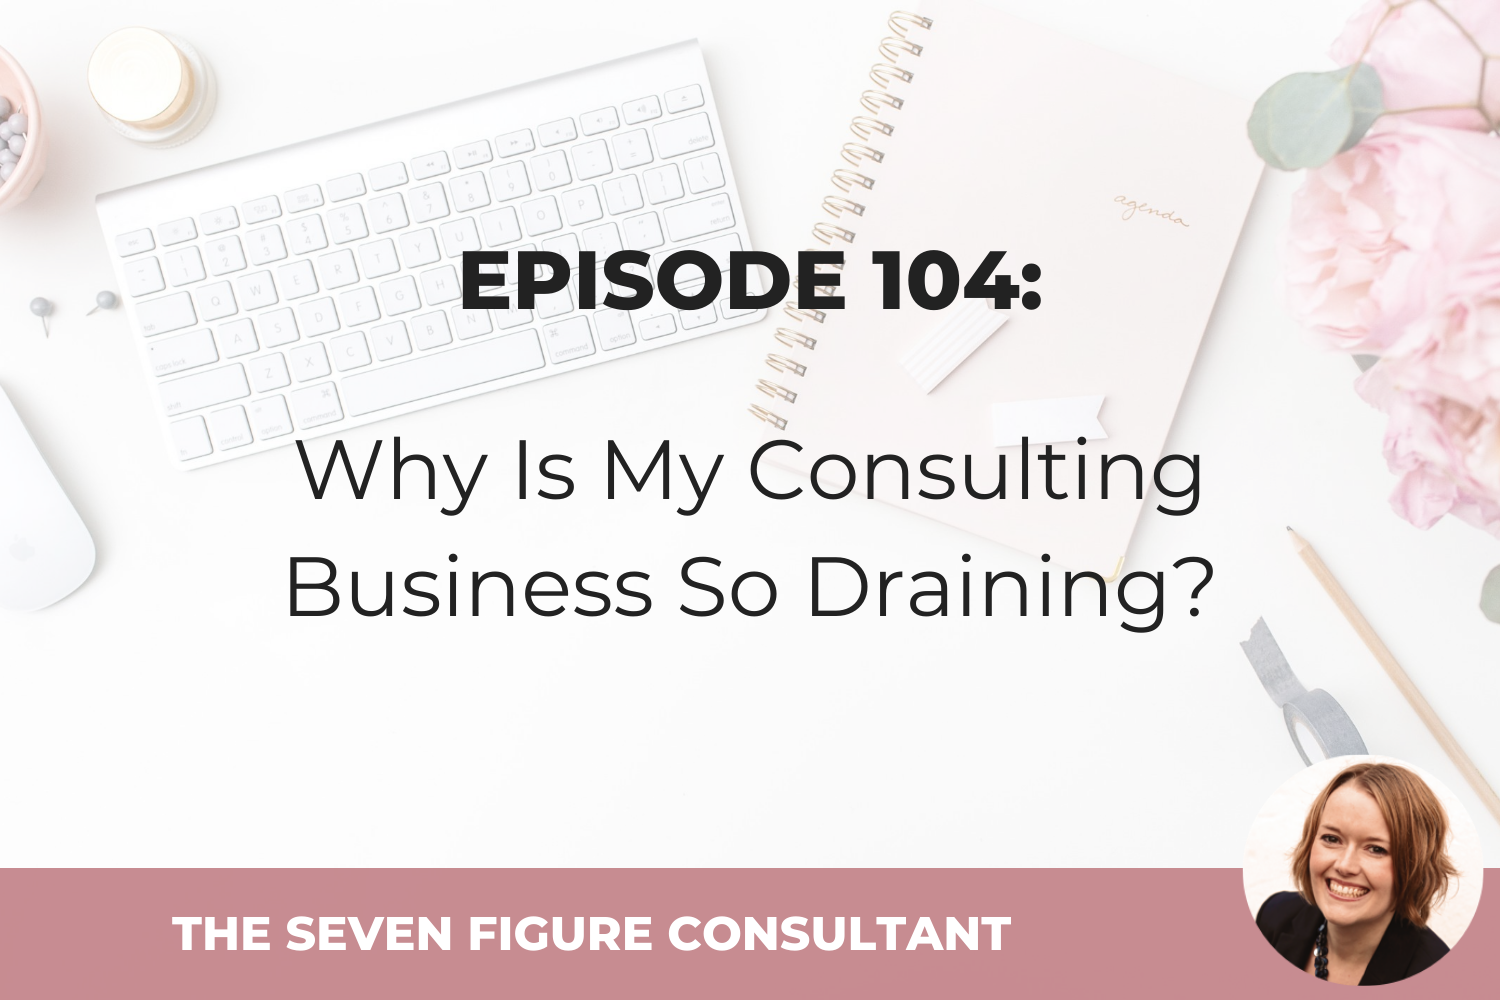 You are currently viewing Episode 104: Why Is My Consulting Business So Draining?